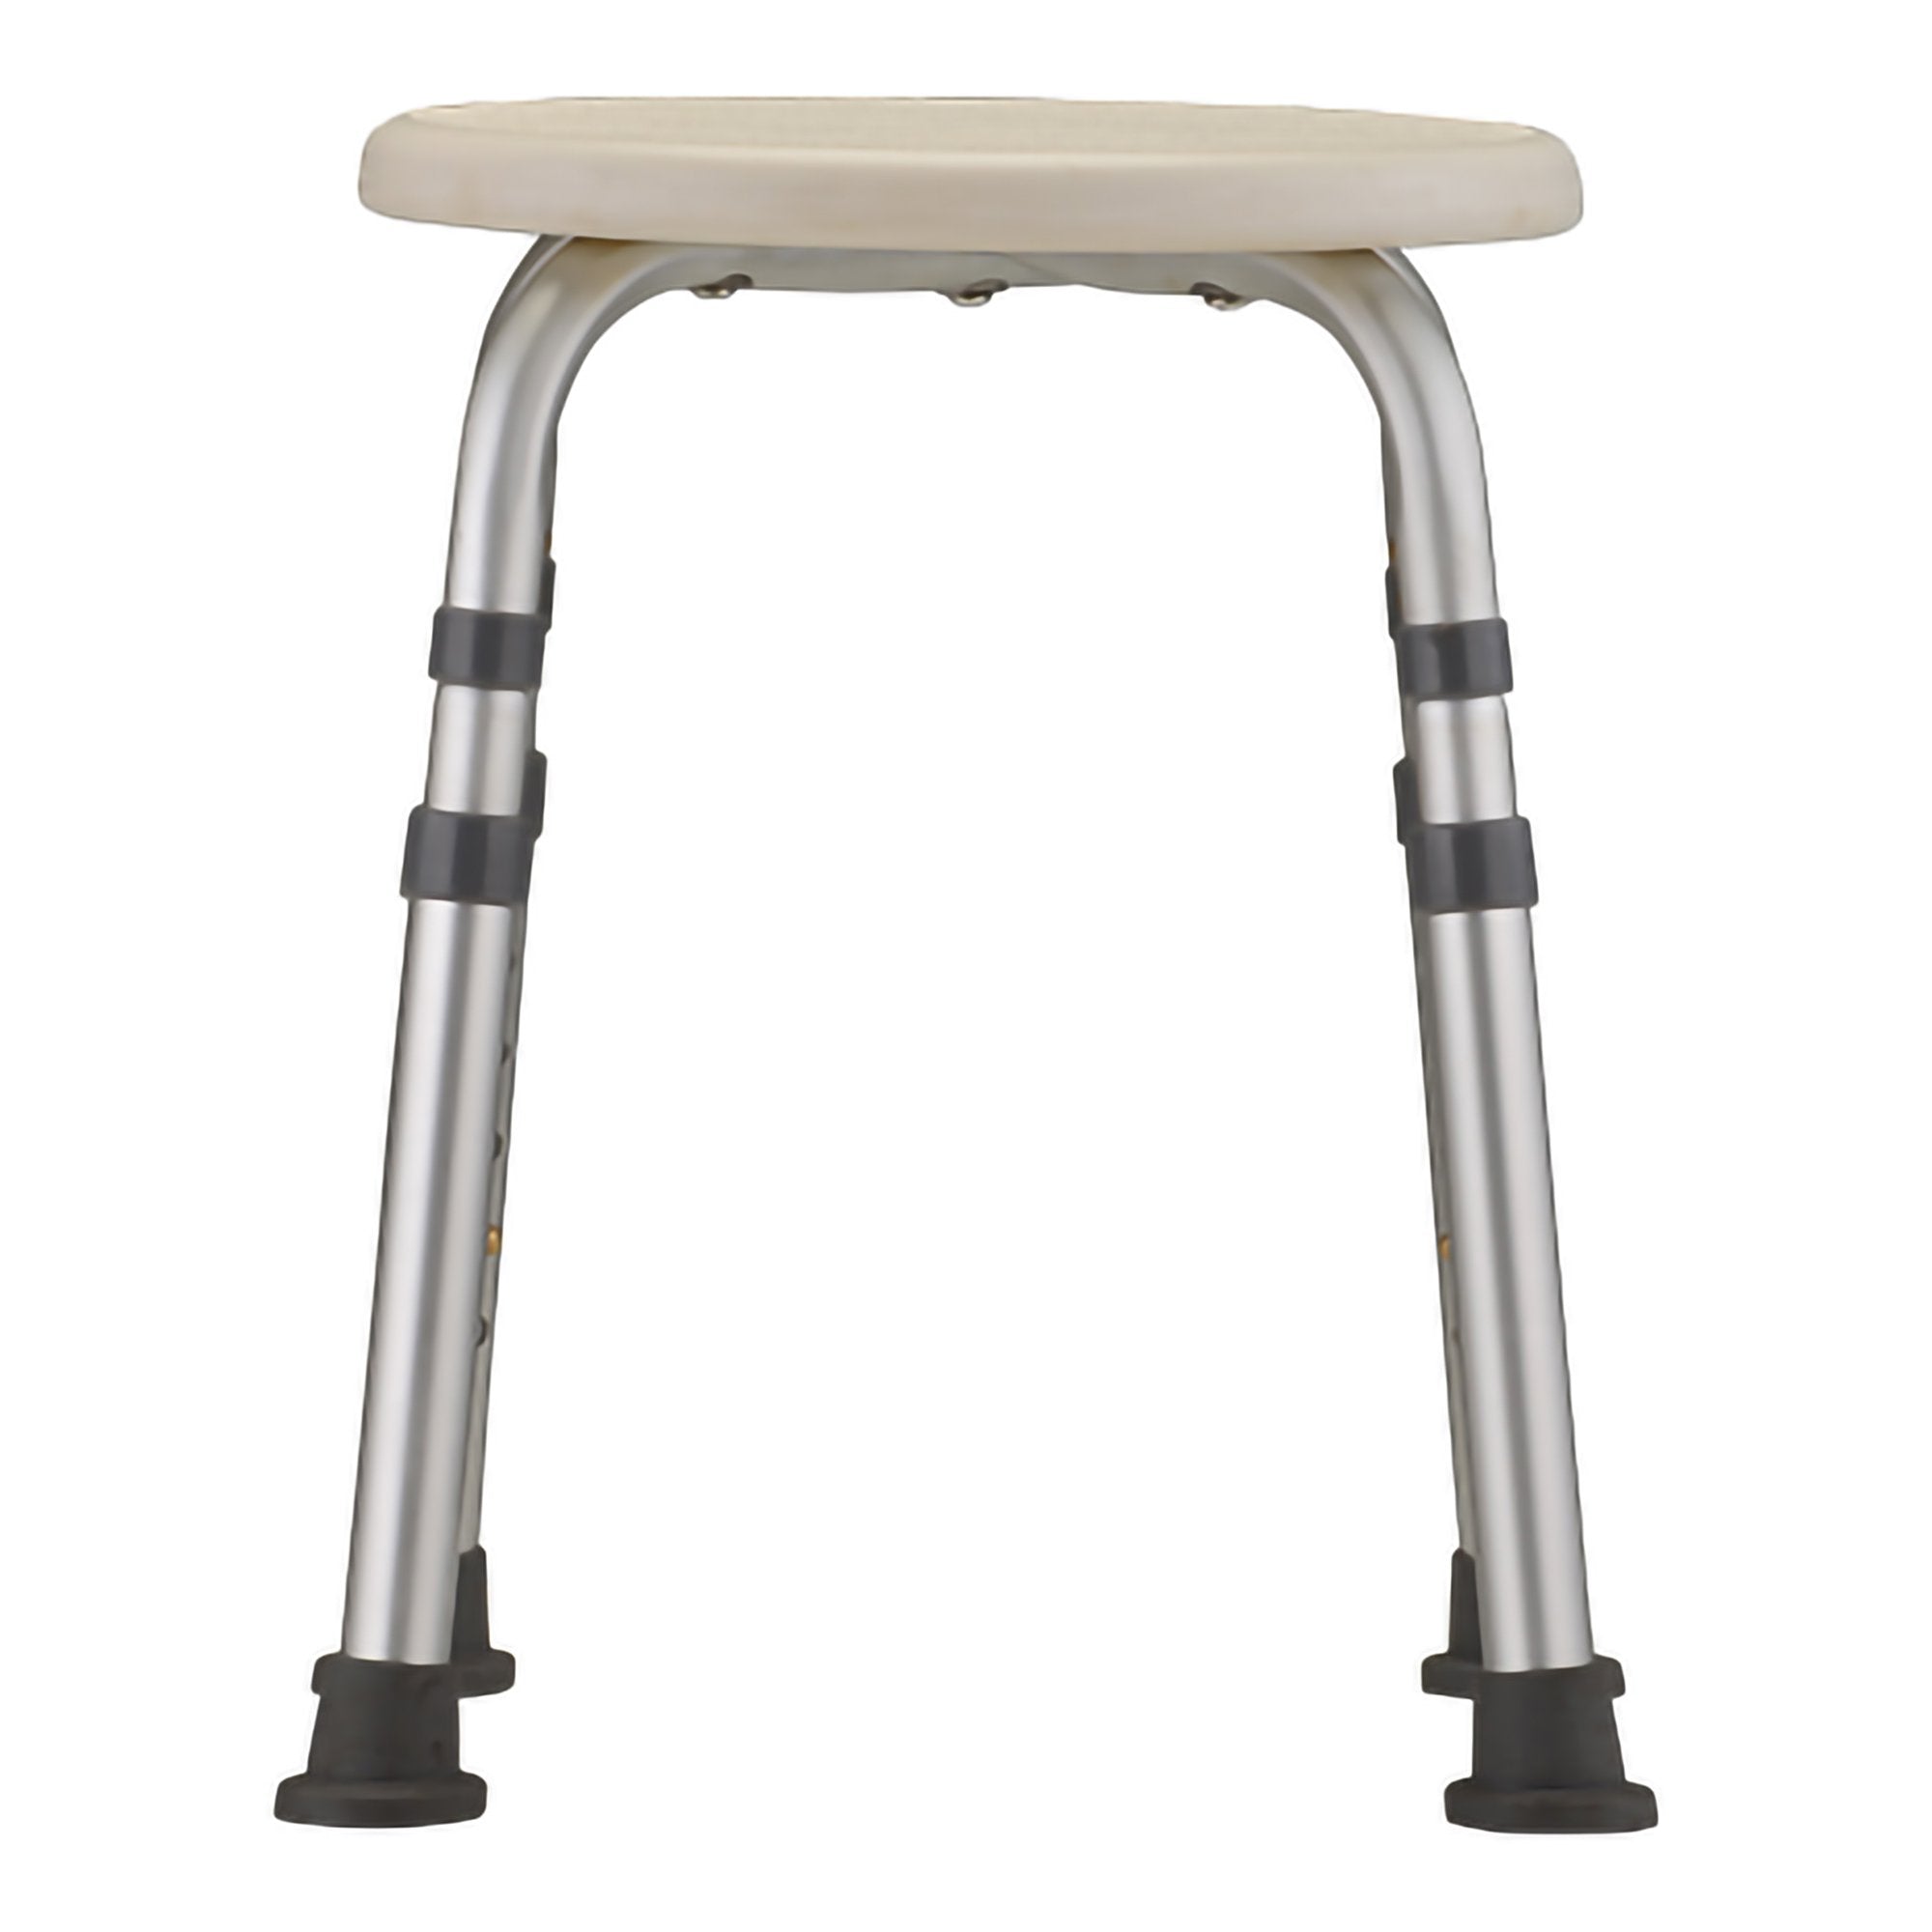 Shower Stool Nova Without Arms Aluminum Frame Without Backrest 12-3/4 Inch Seat Width 300 lbs. Weight Capacity